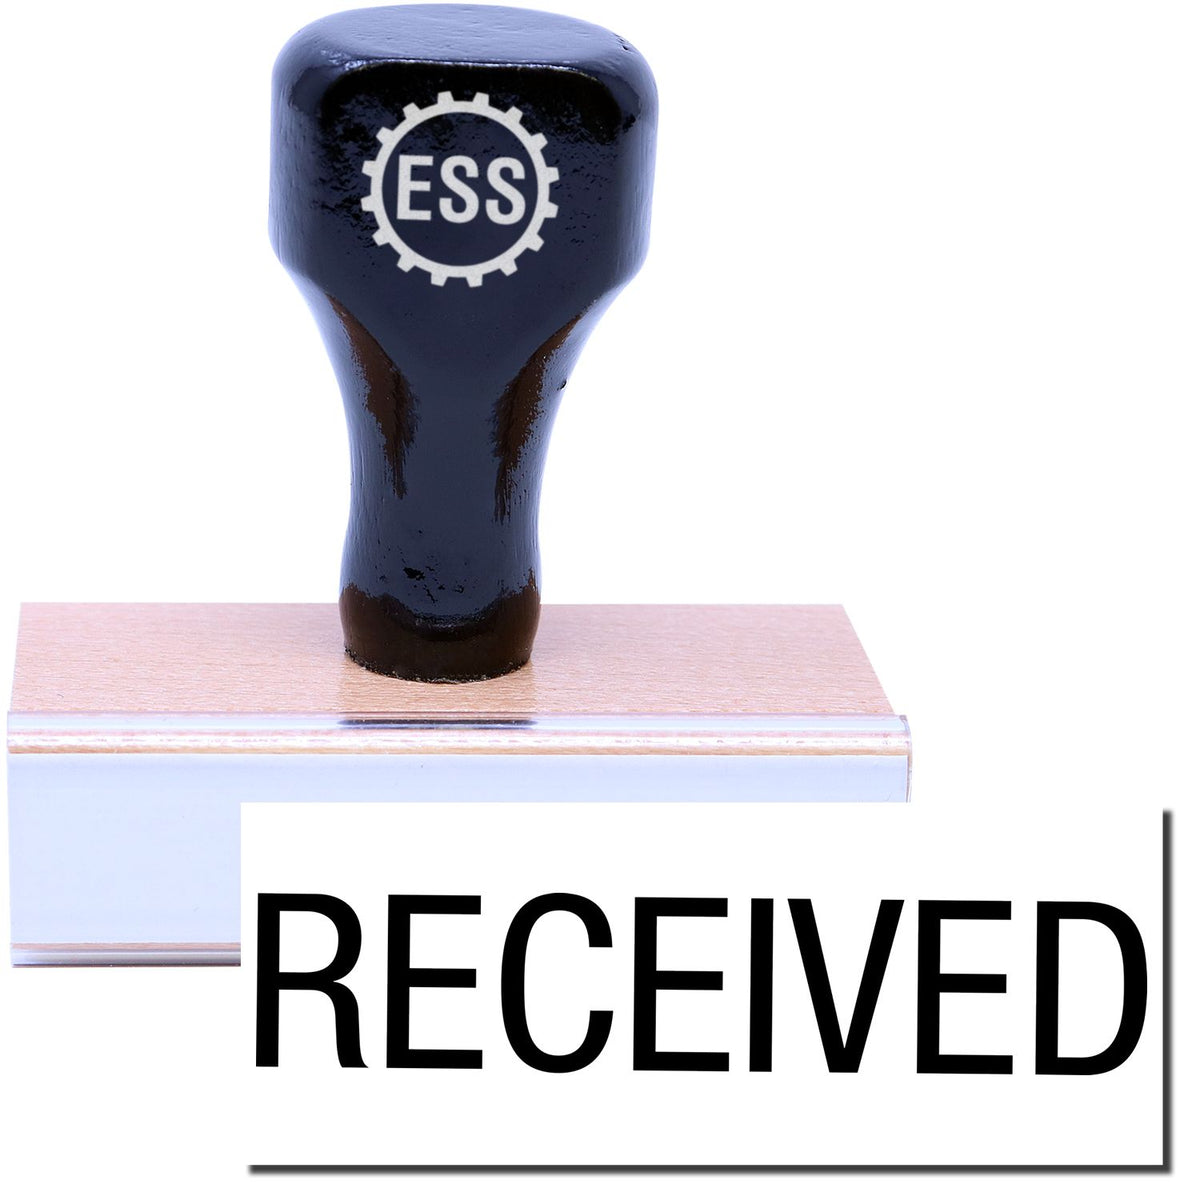 A stock office rubber stamp with a stamped image showing how the text &quot;RECEIVED&quot; is displayed after stamping.